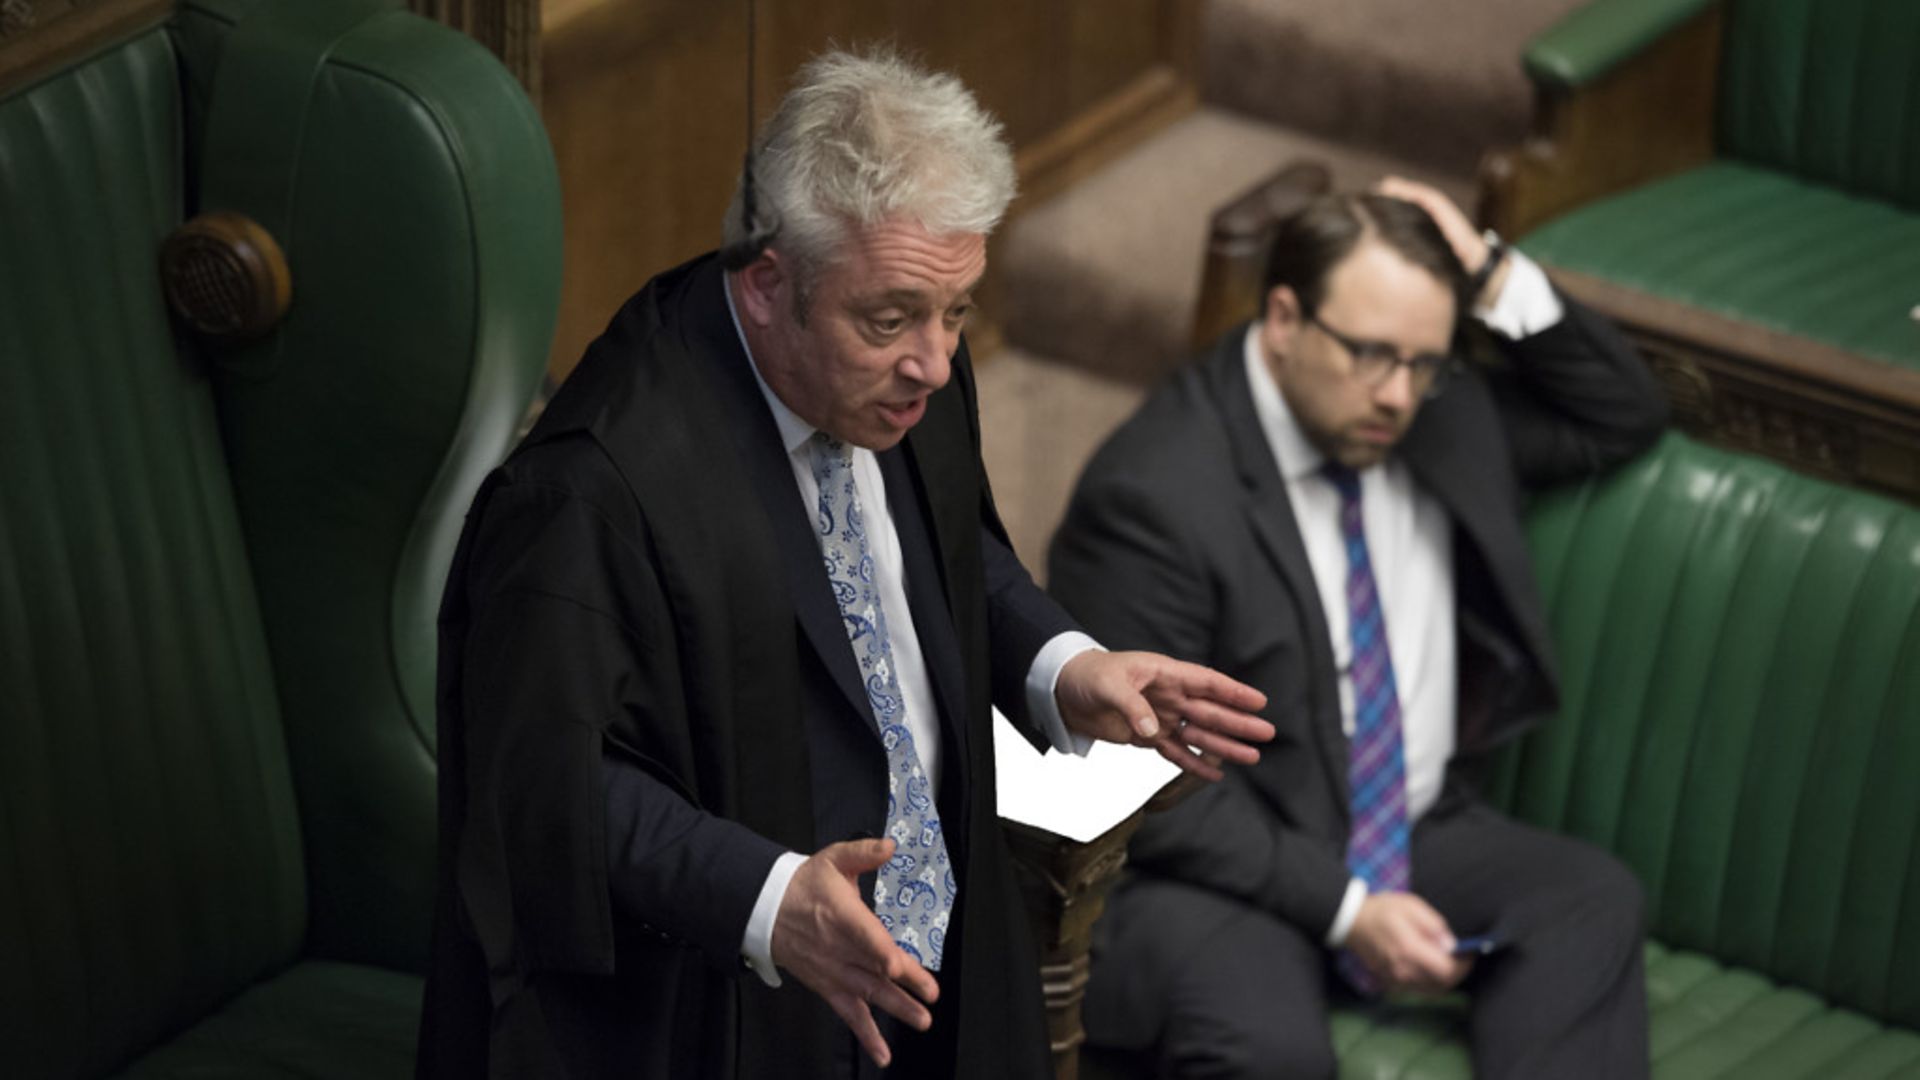 Former speaker John Bercow in the House of Commons - Credit: Archant